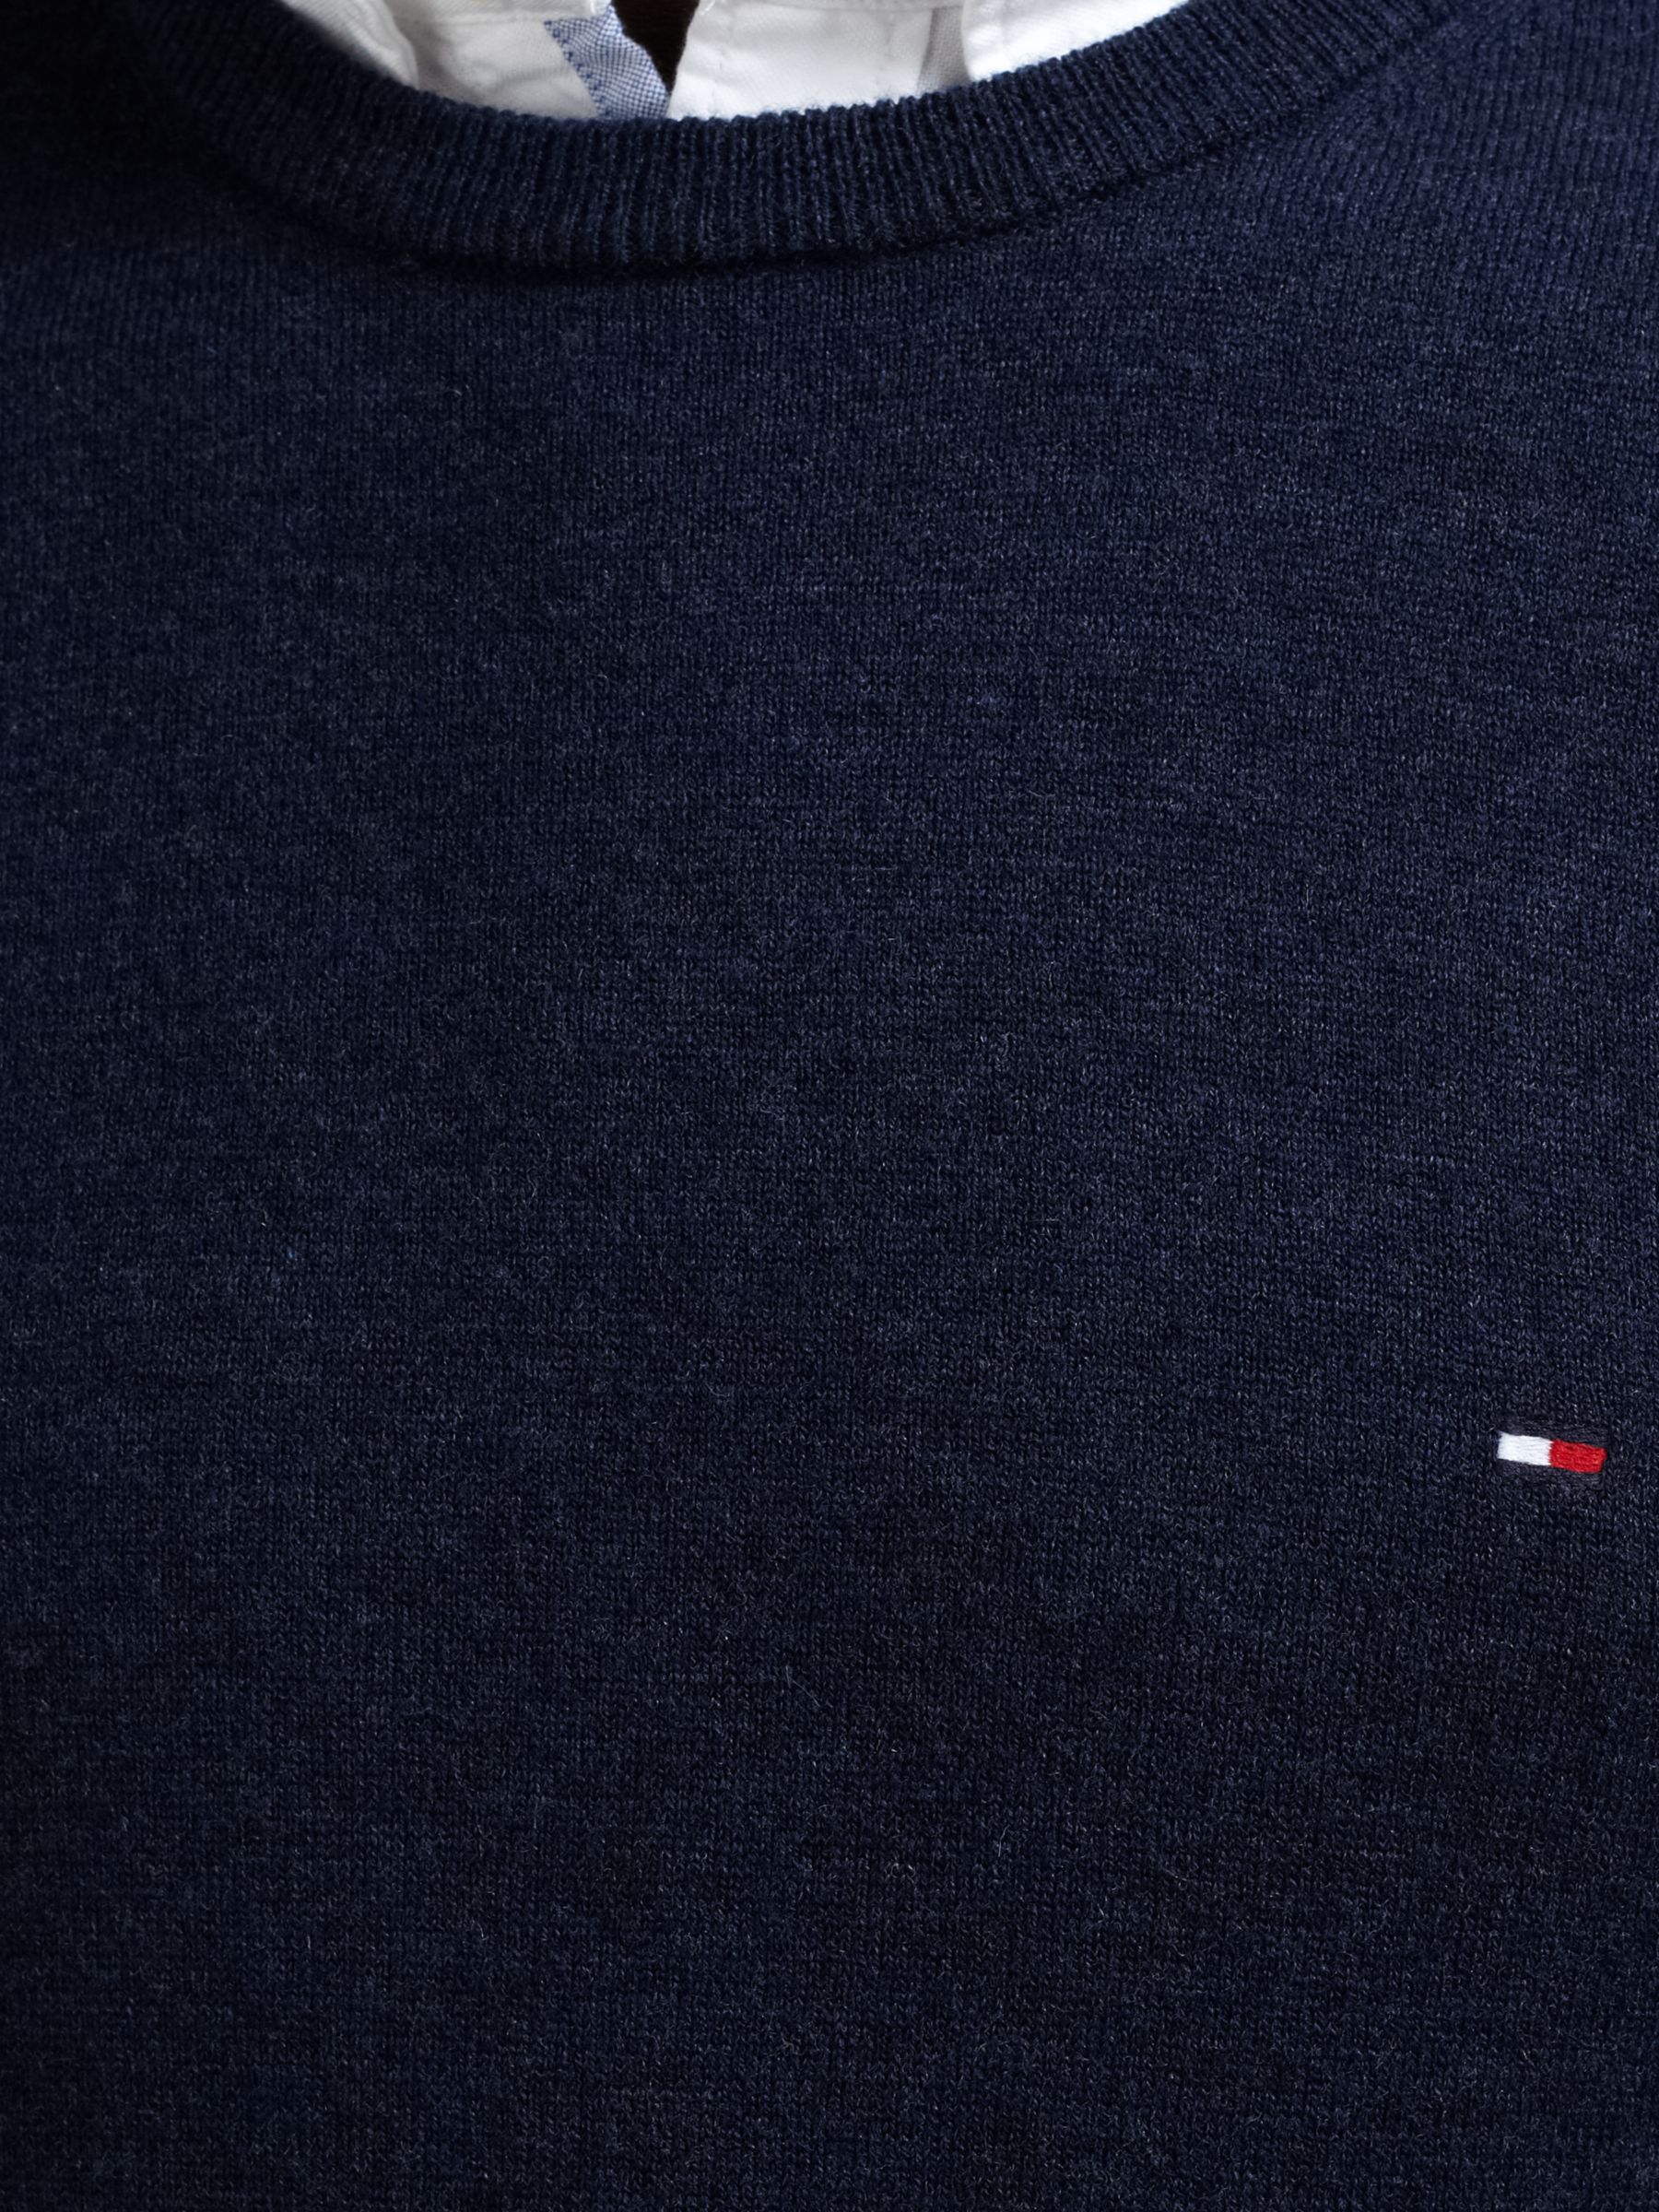 Tommy Hilfiger Lambswool Crew Neck 